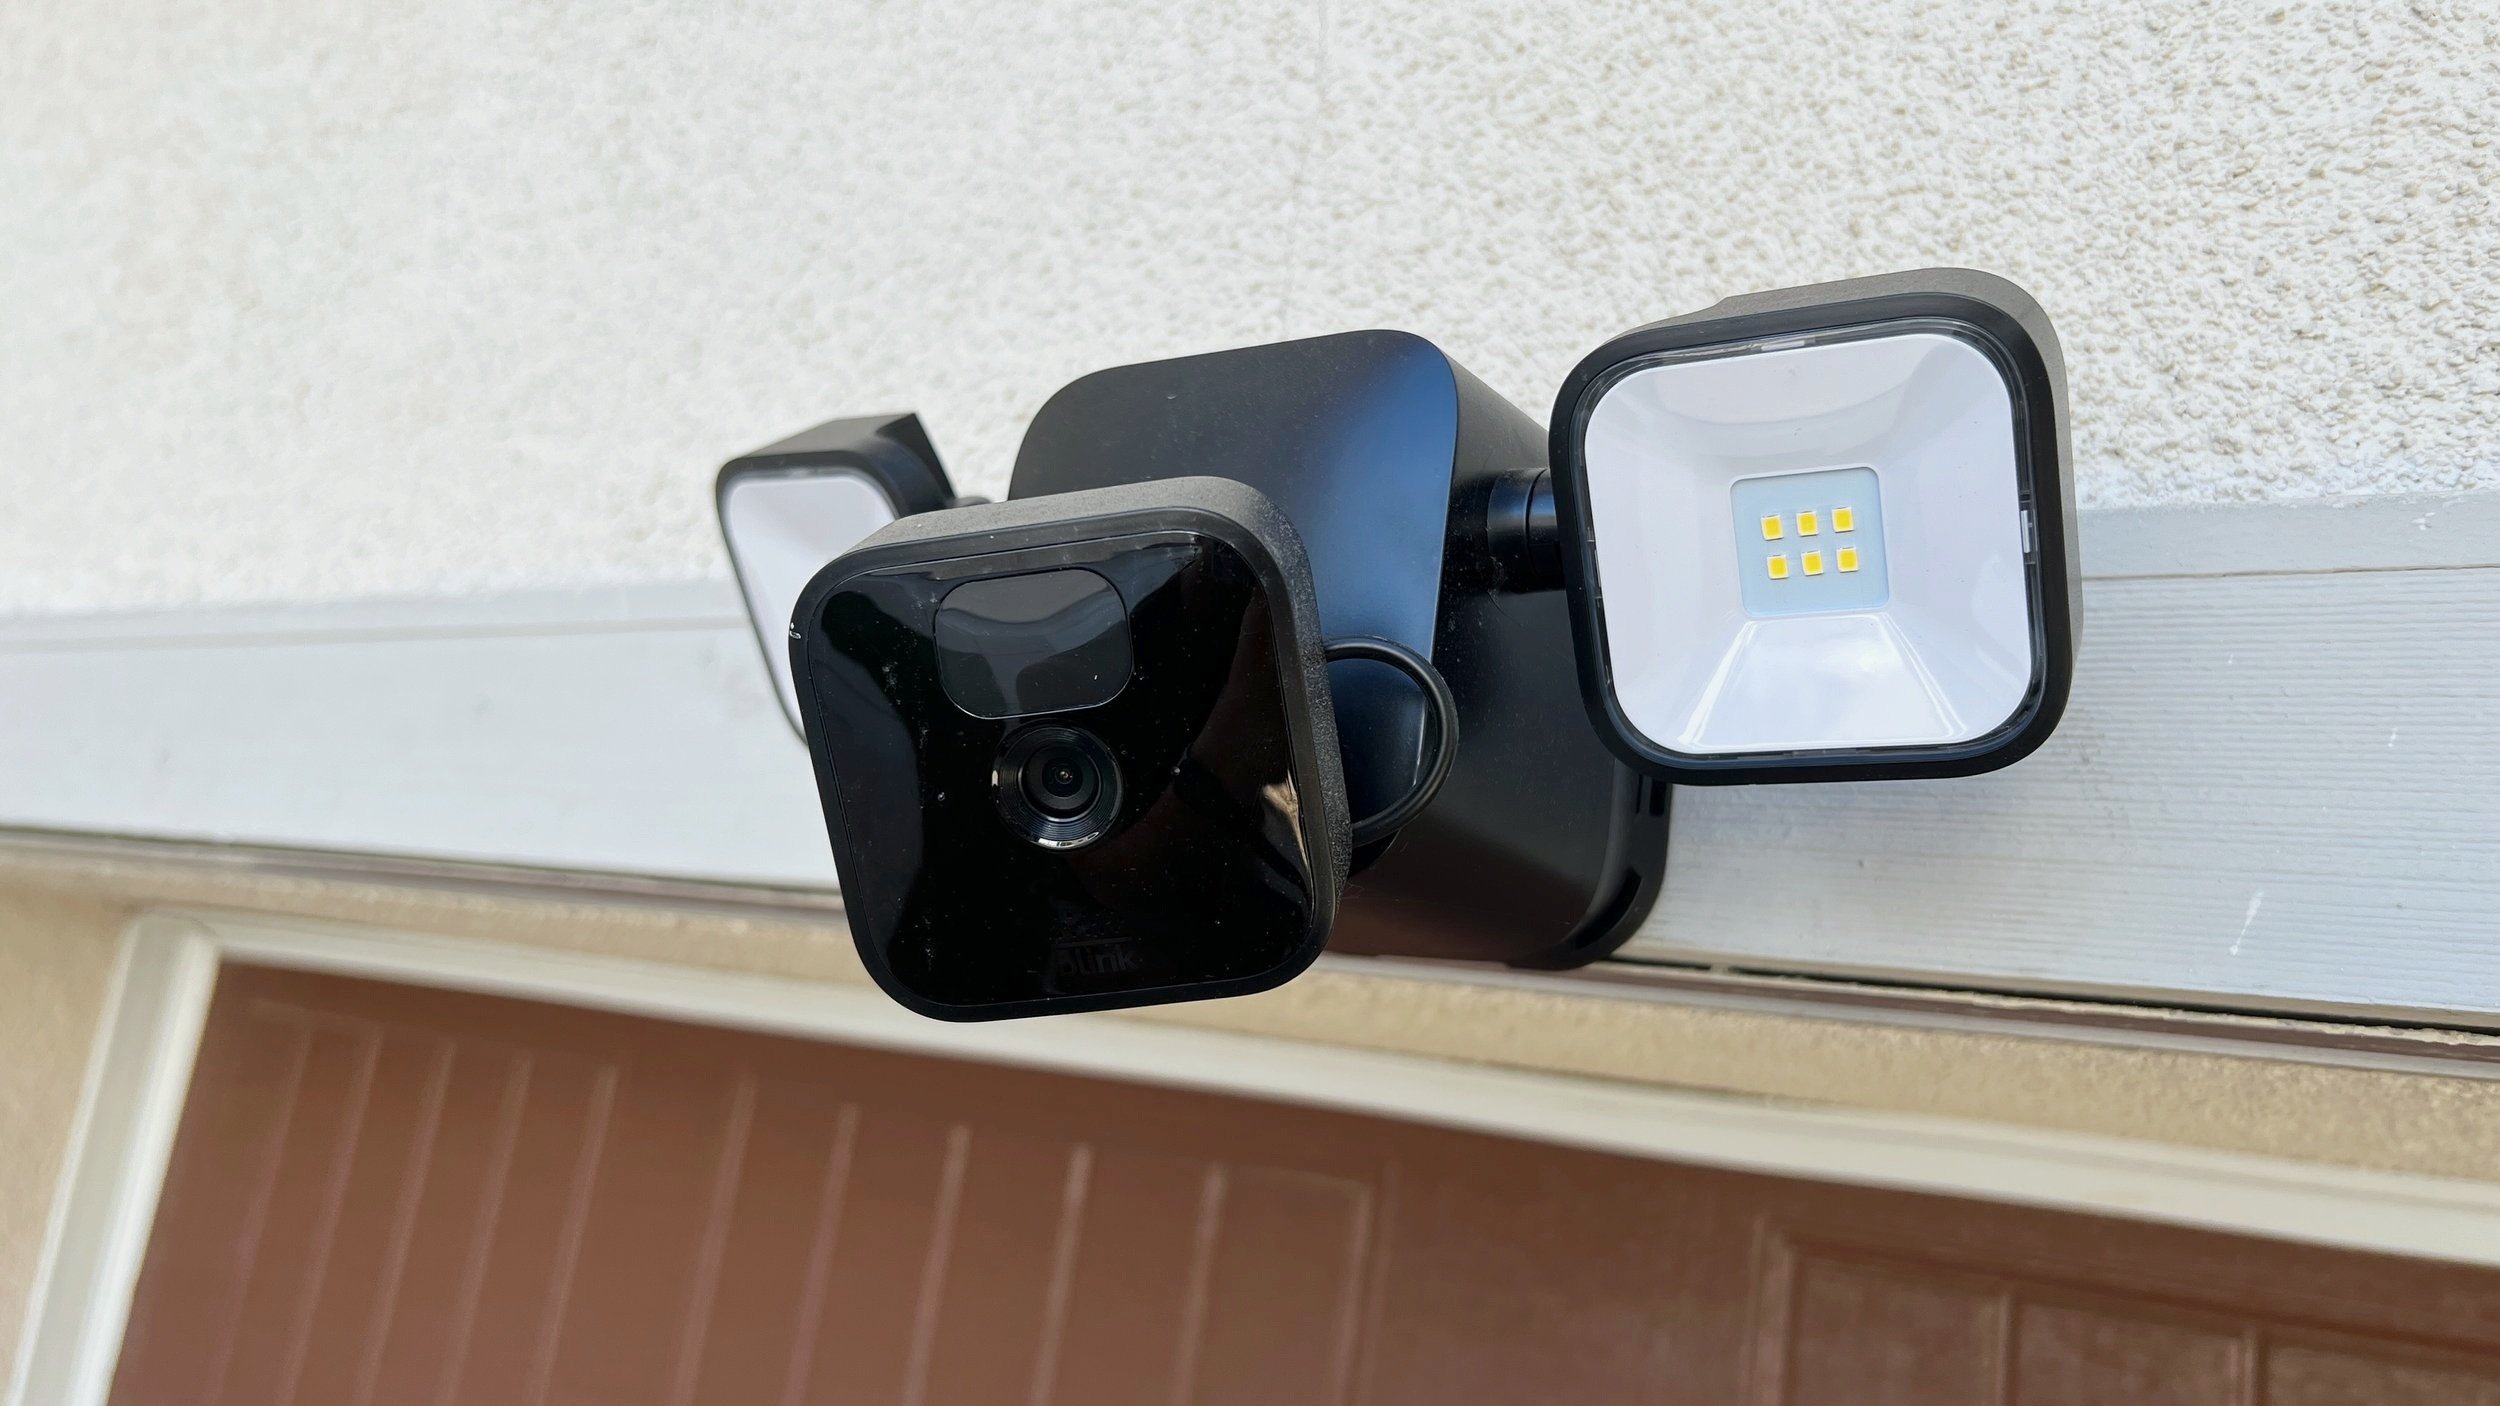 How to set up a Blink security system